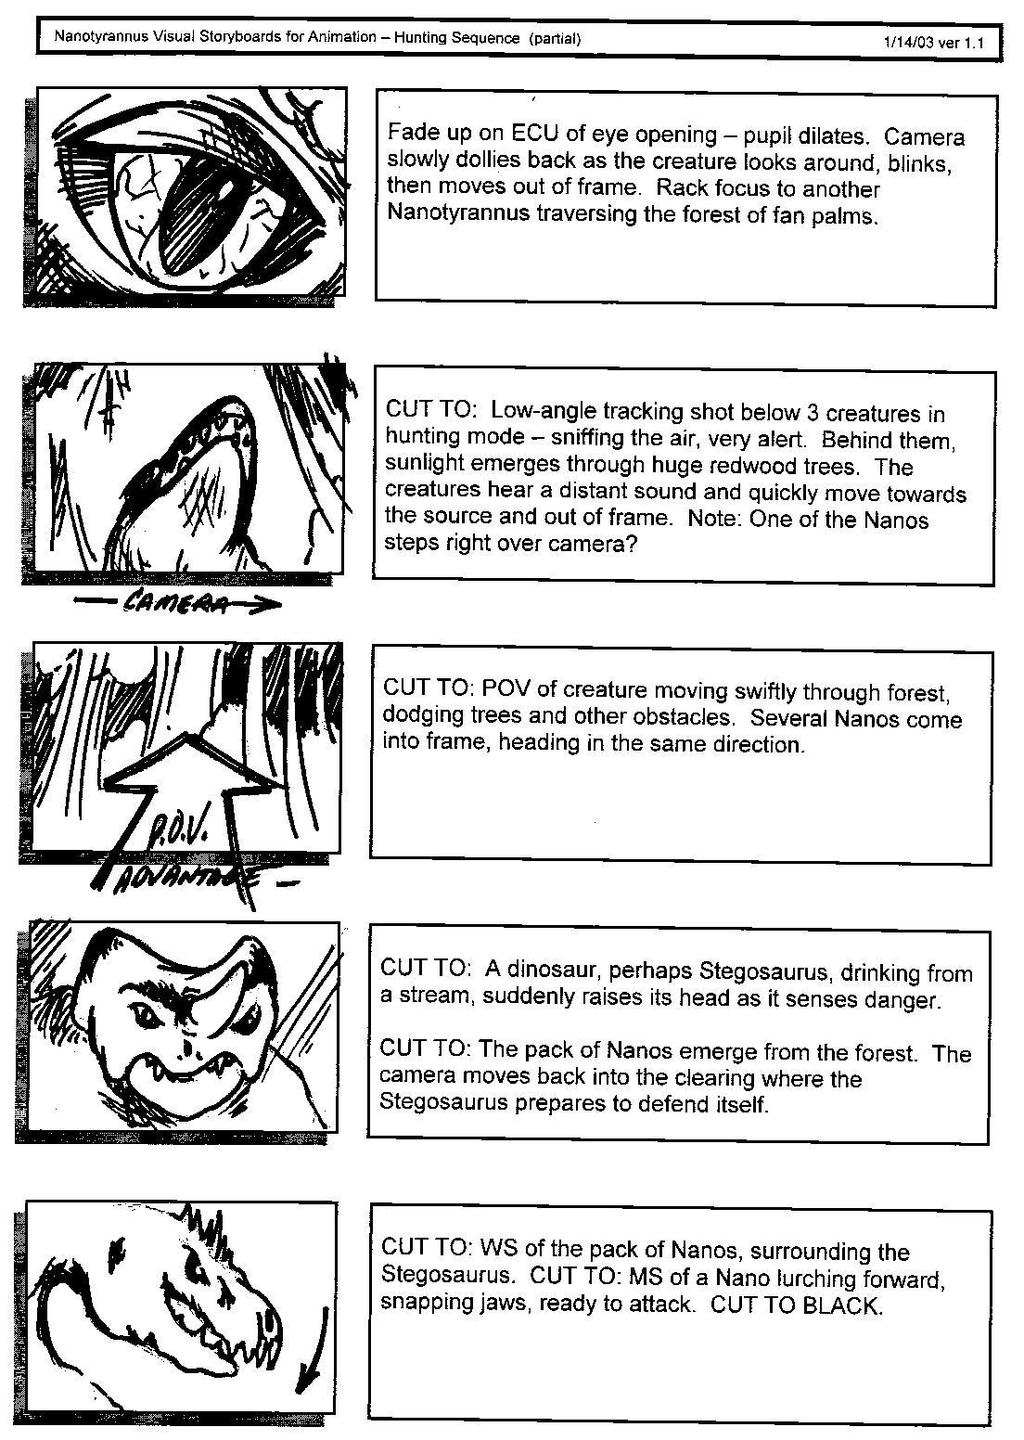 STORYBOARD EXAMPLES From the Jane